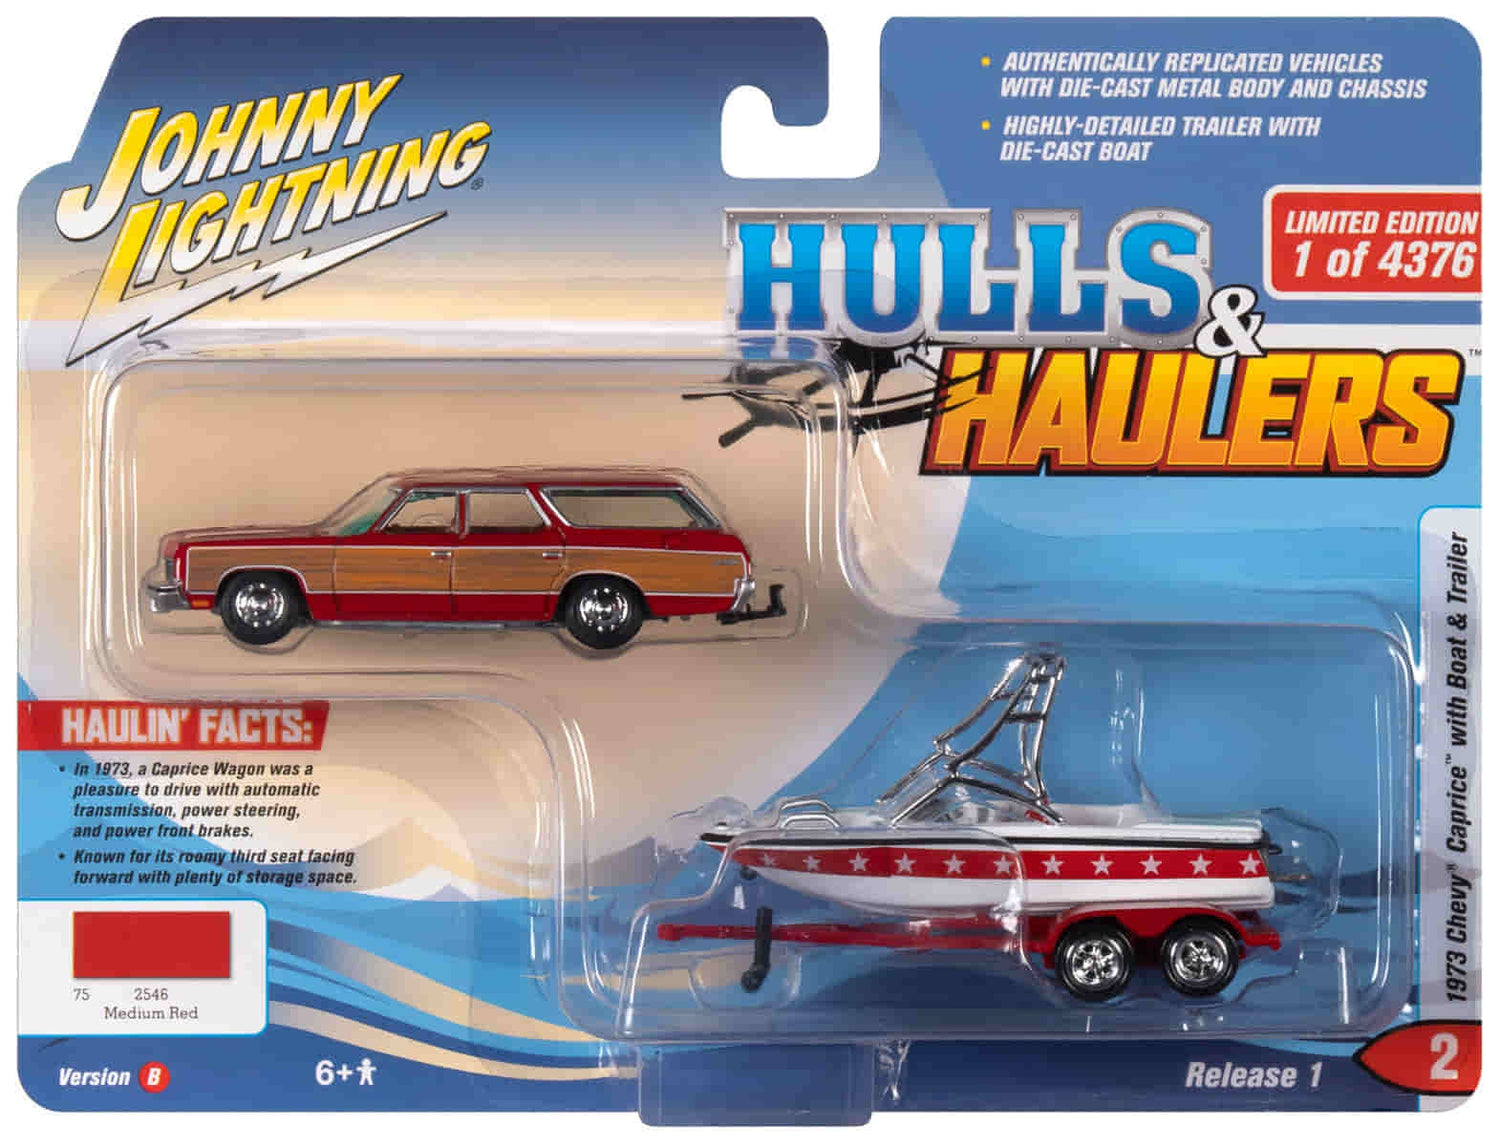 Johnny Lightning 1973 Chevy Caprice Wagon (Red Woody, White & Red) w/Mastercraft Boat and Trailer 1:64 Diecast